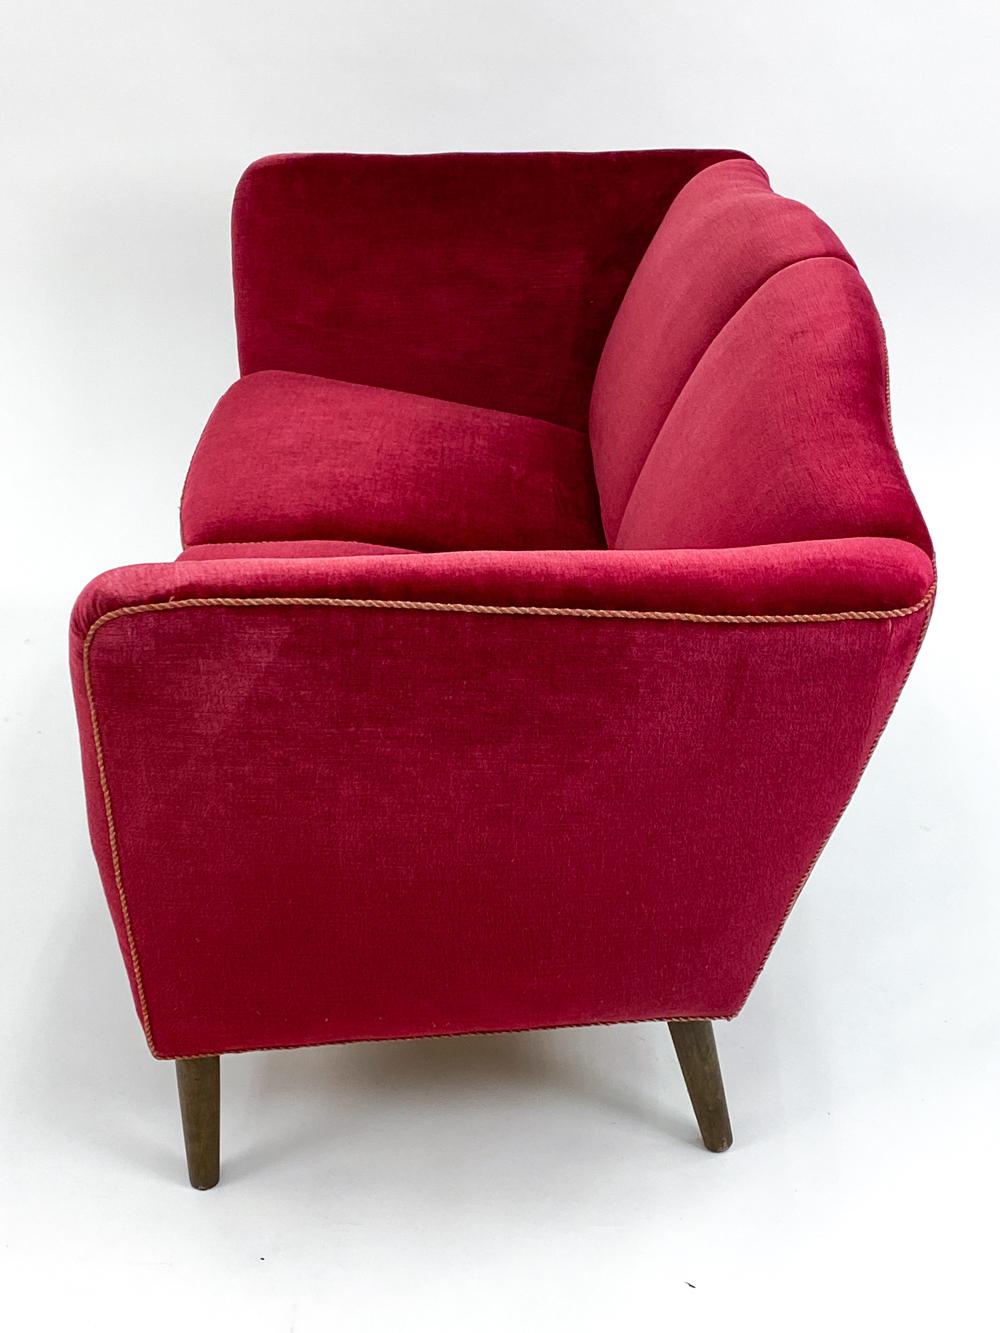 Swedish Mid-Century Beech & Red Mohair Sofa, c. 1950's For Sale 1